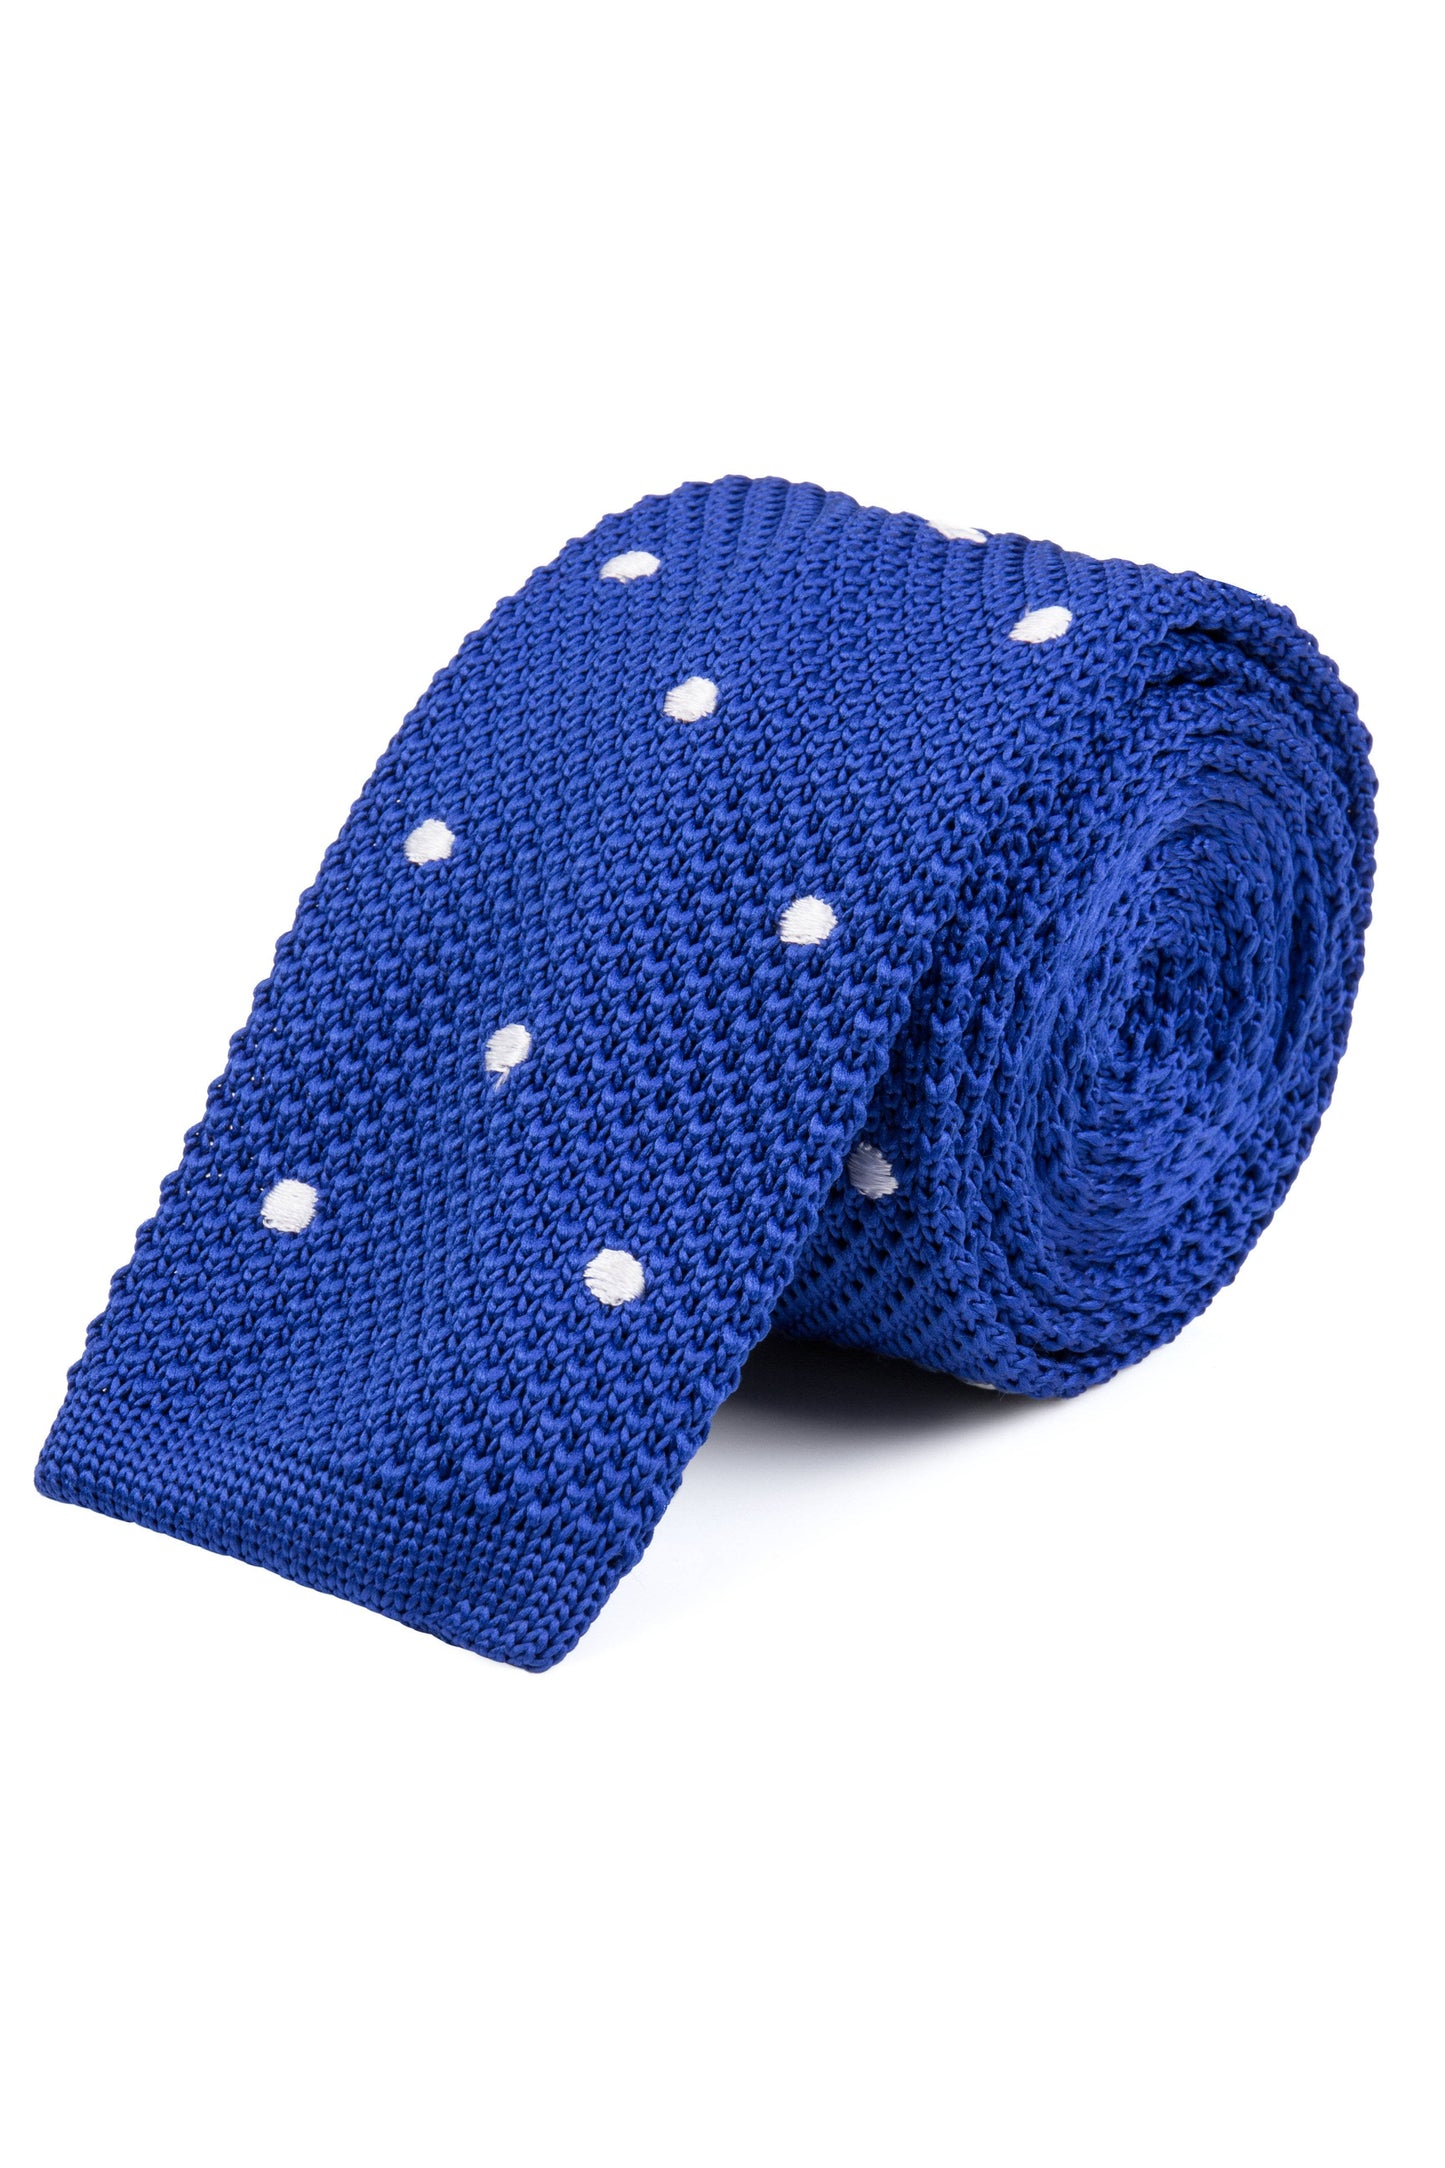 Royal Blue White Spot Knitted Tie by Empire Outlet Men's Wedding Accessories